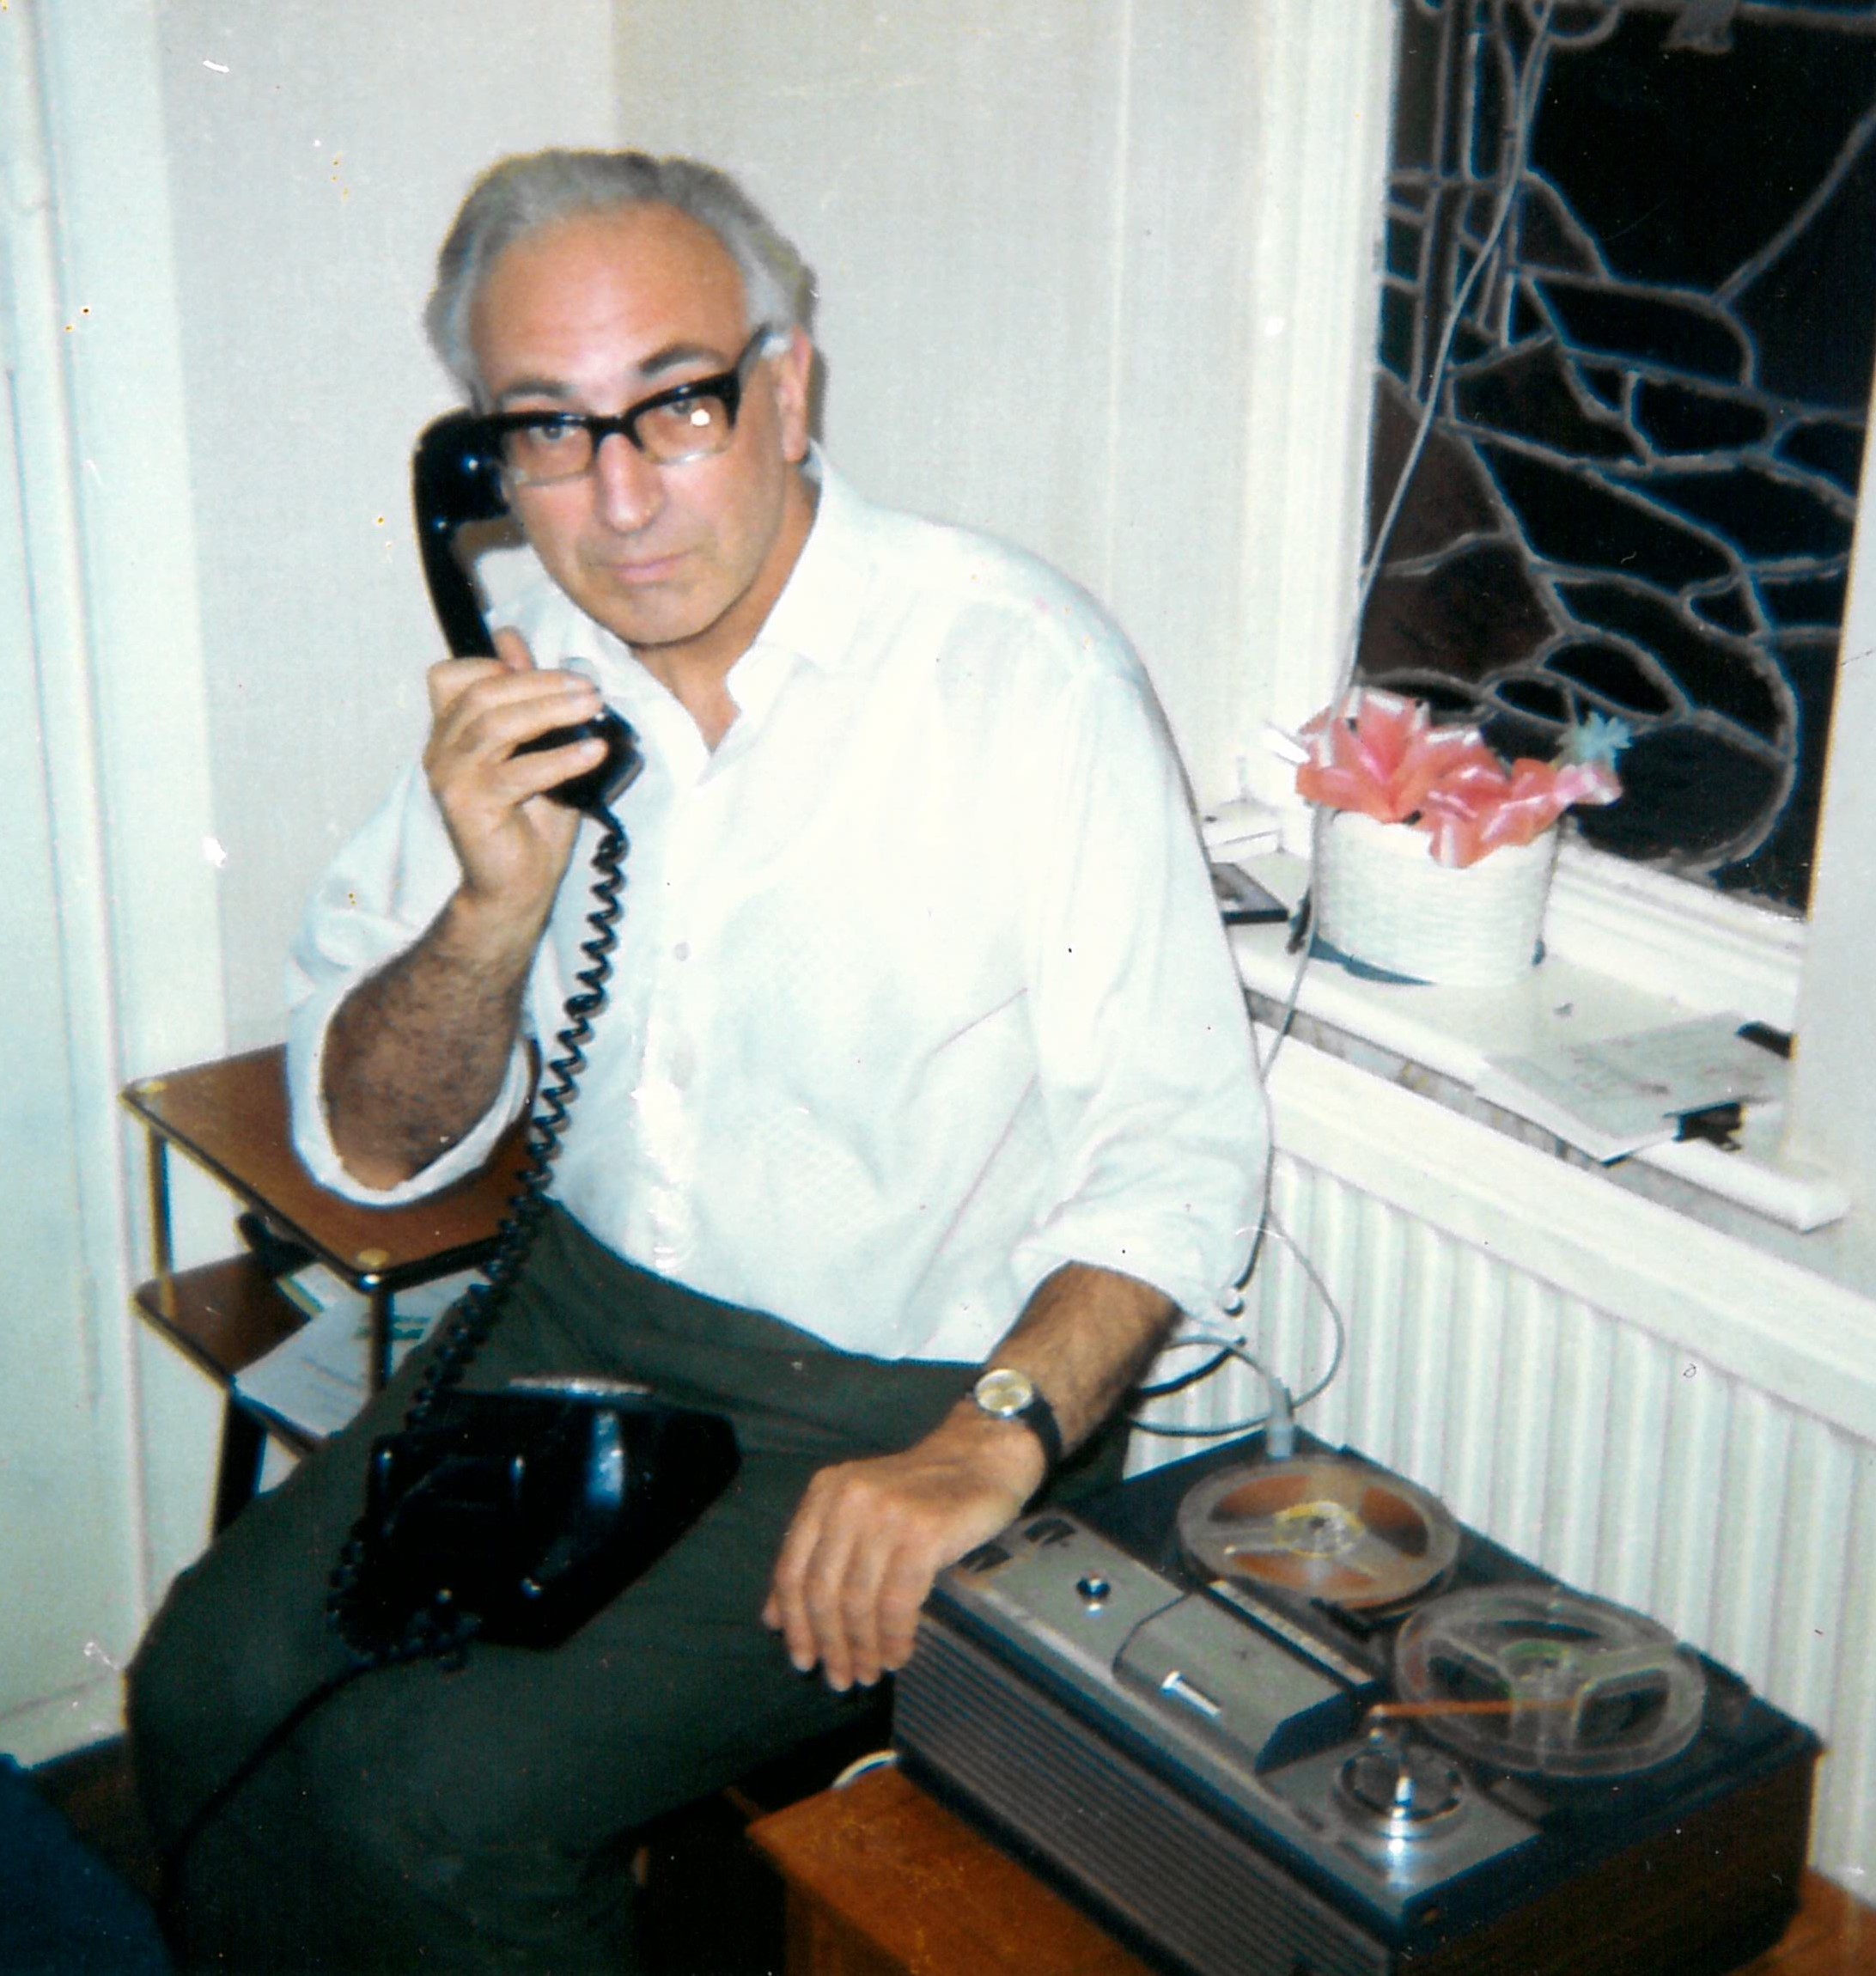 Michael Sherbourne on the telephone with his recording equipment, c.1980s-1990s [MS434 A4249 7/4]